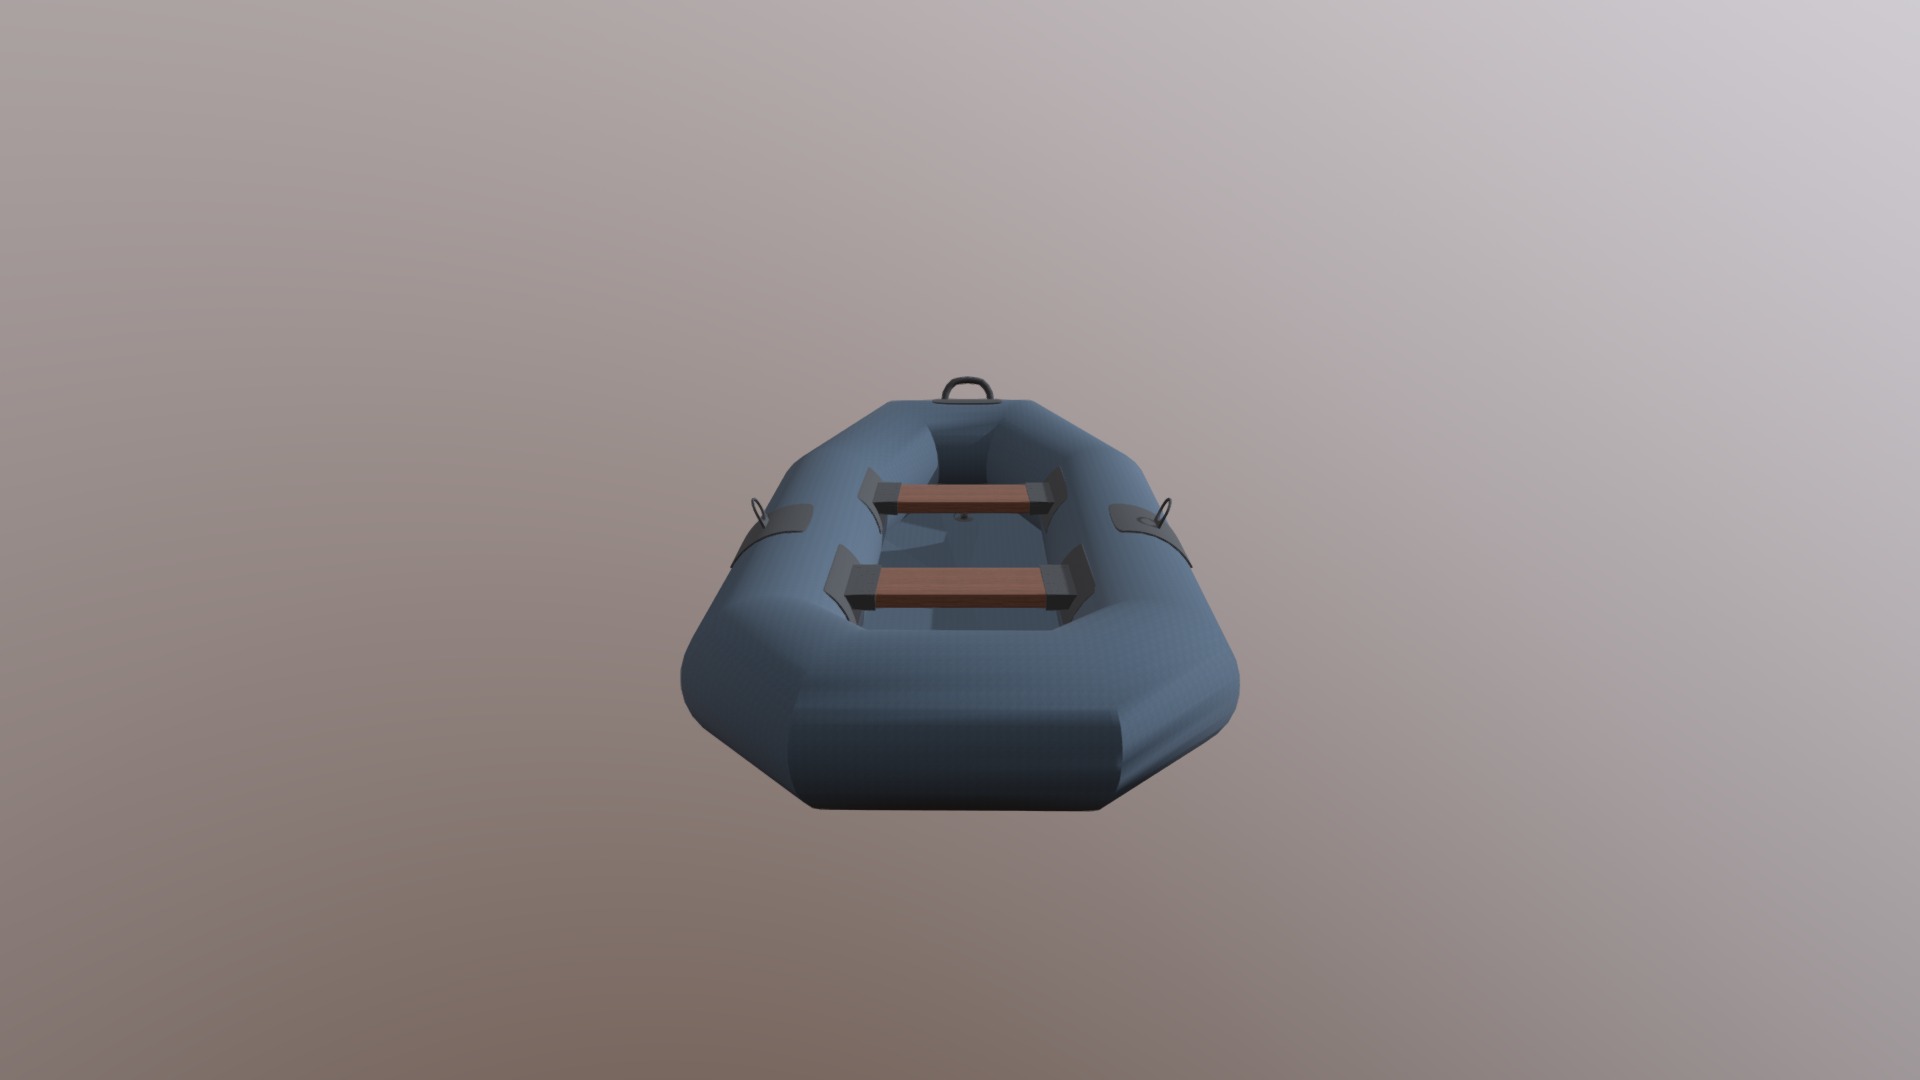 3D model Rubber Boat - This is a 3D model of the Rubber Boat. The 3D model is about a small blue and white object.